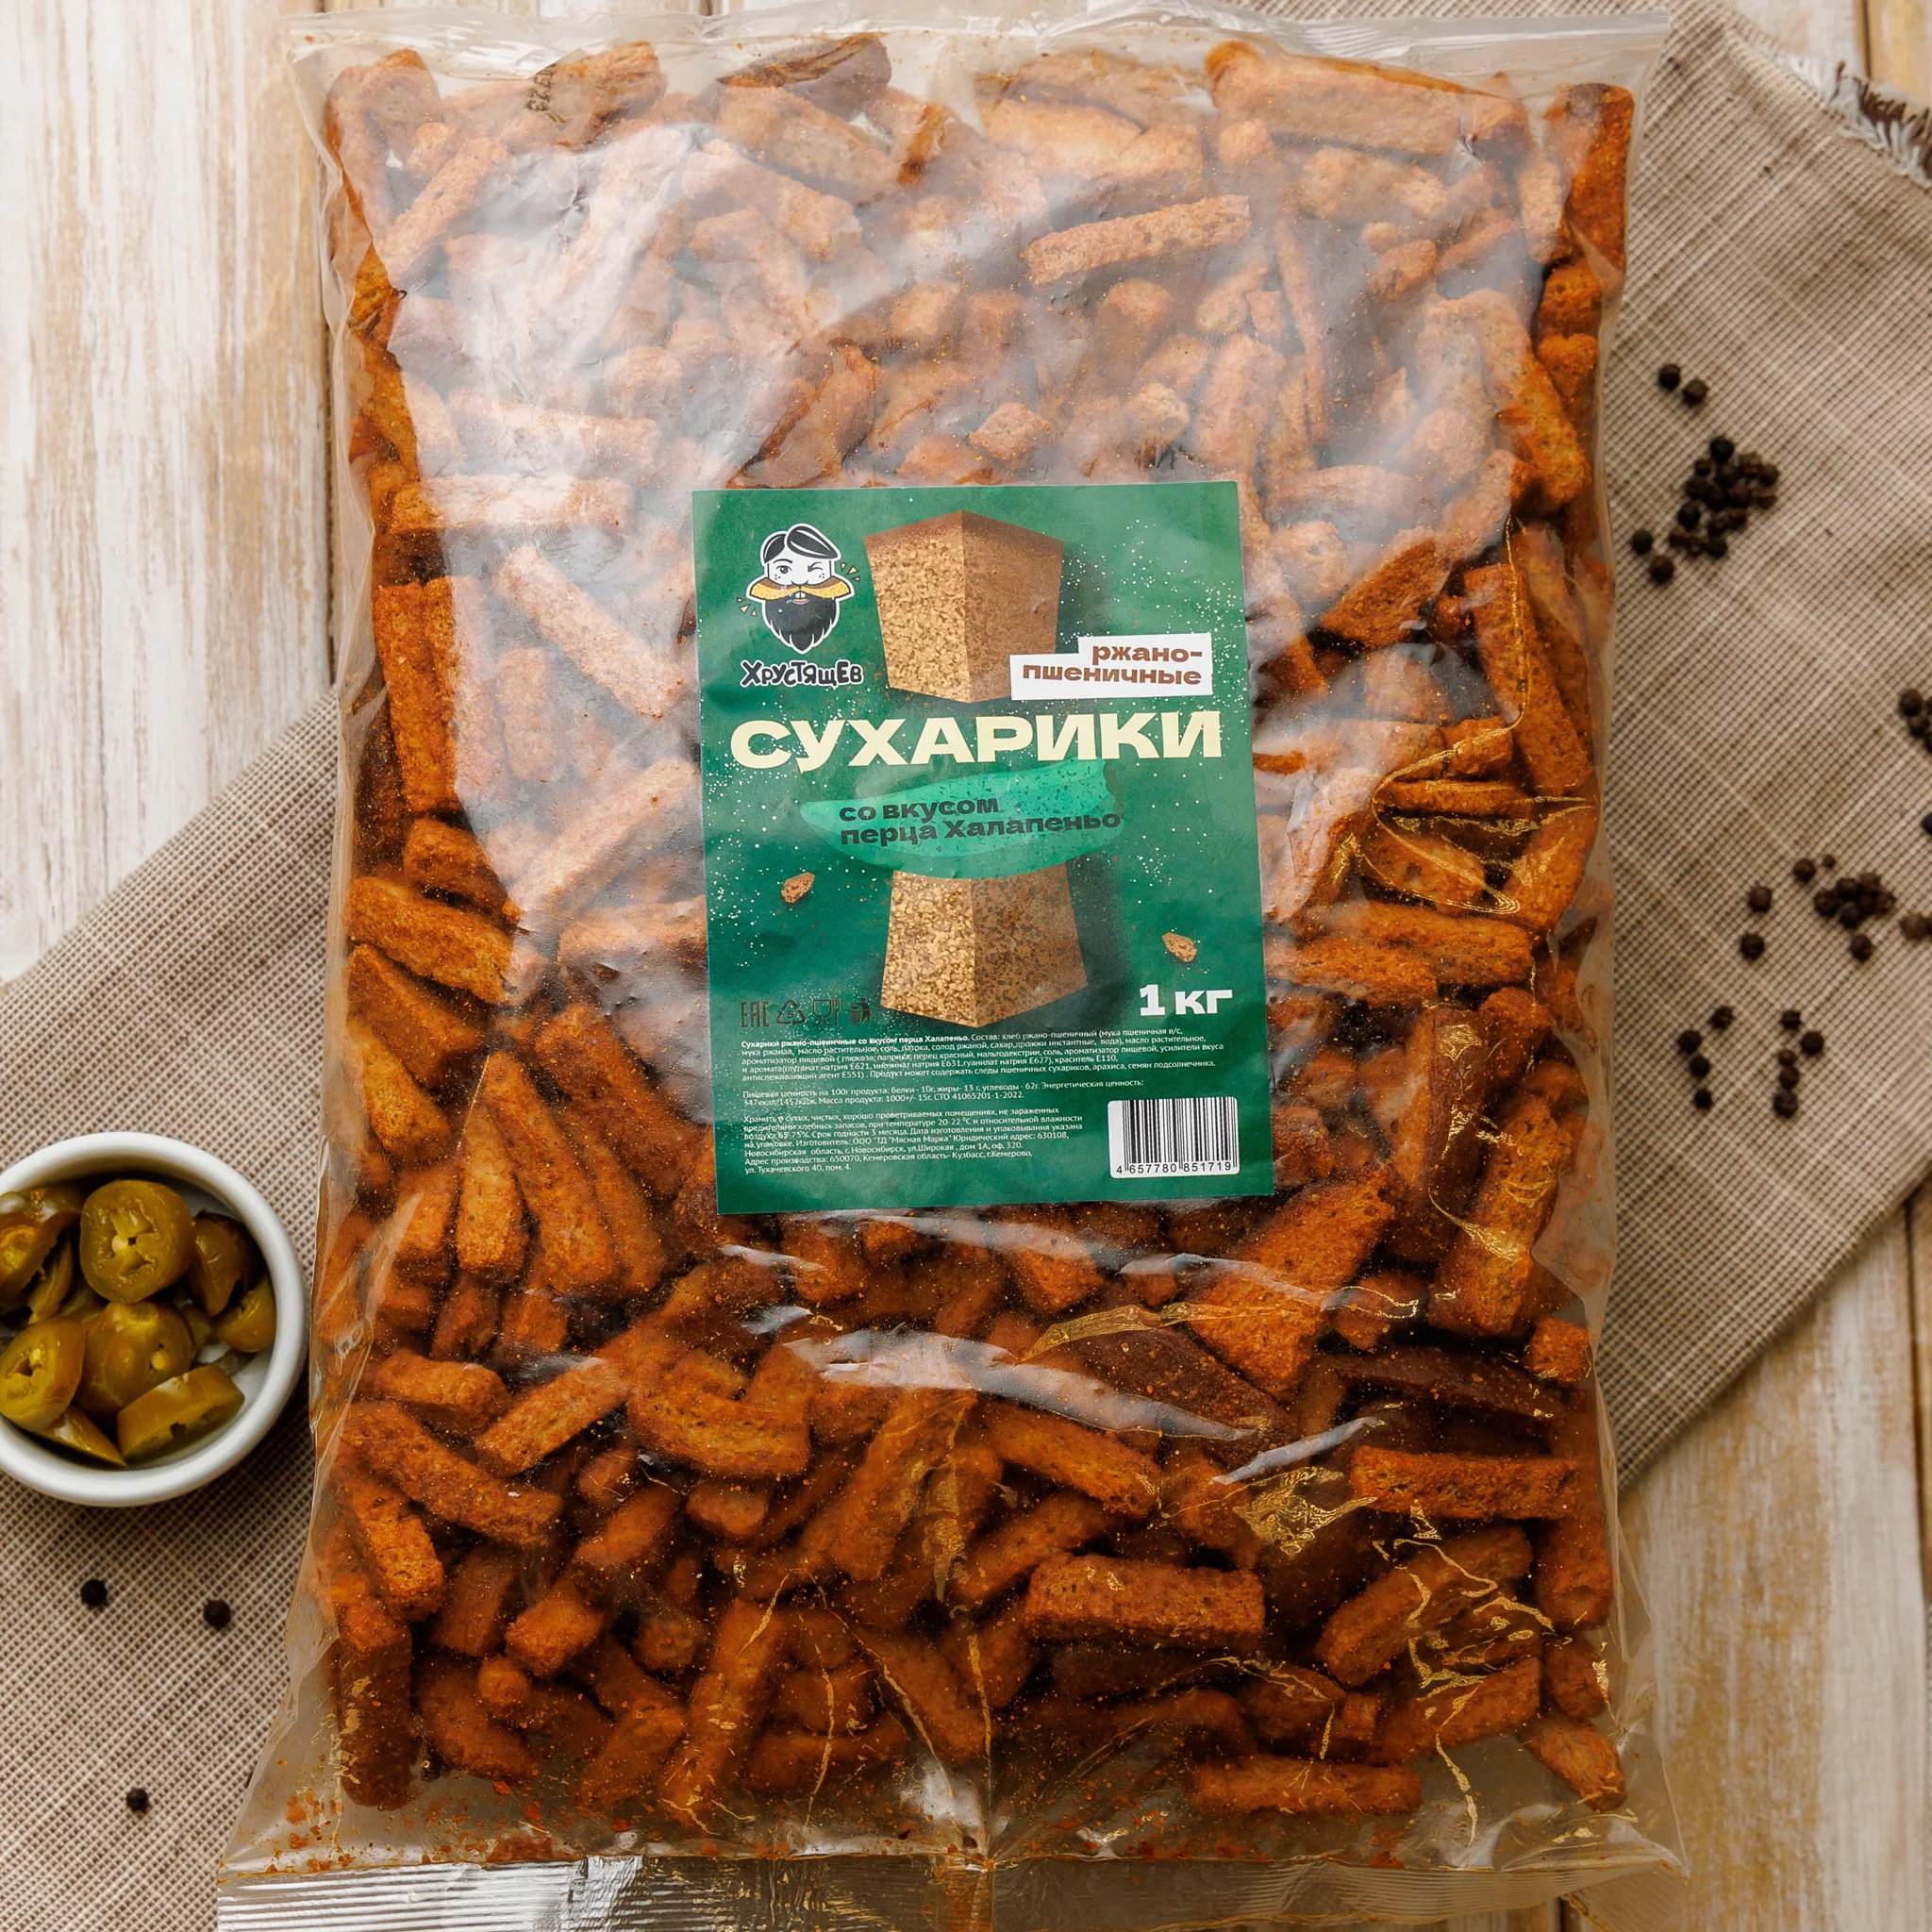 Rye-wheat crackers with Jalapeno pepper flavor 1 kg / Jalapeno pepper crackers 1000 gr / Croutons / Snacks for soup